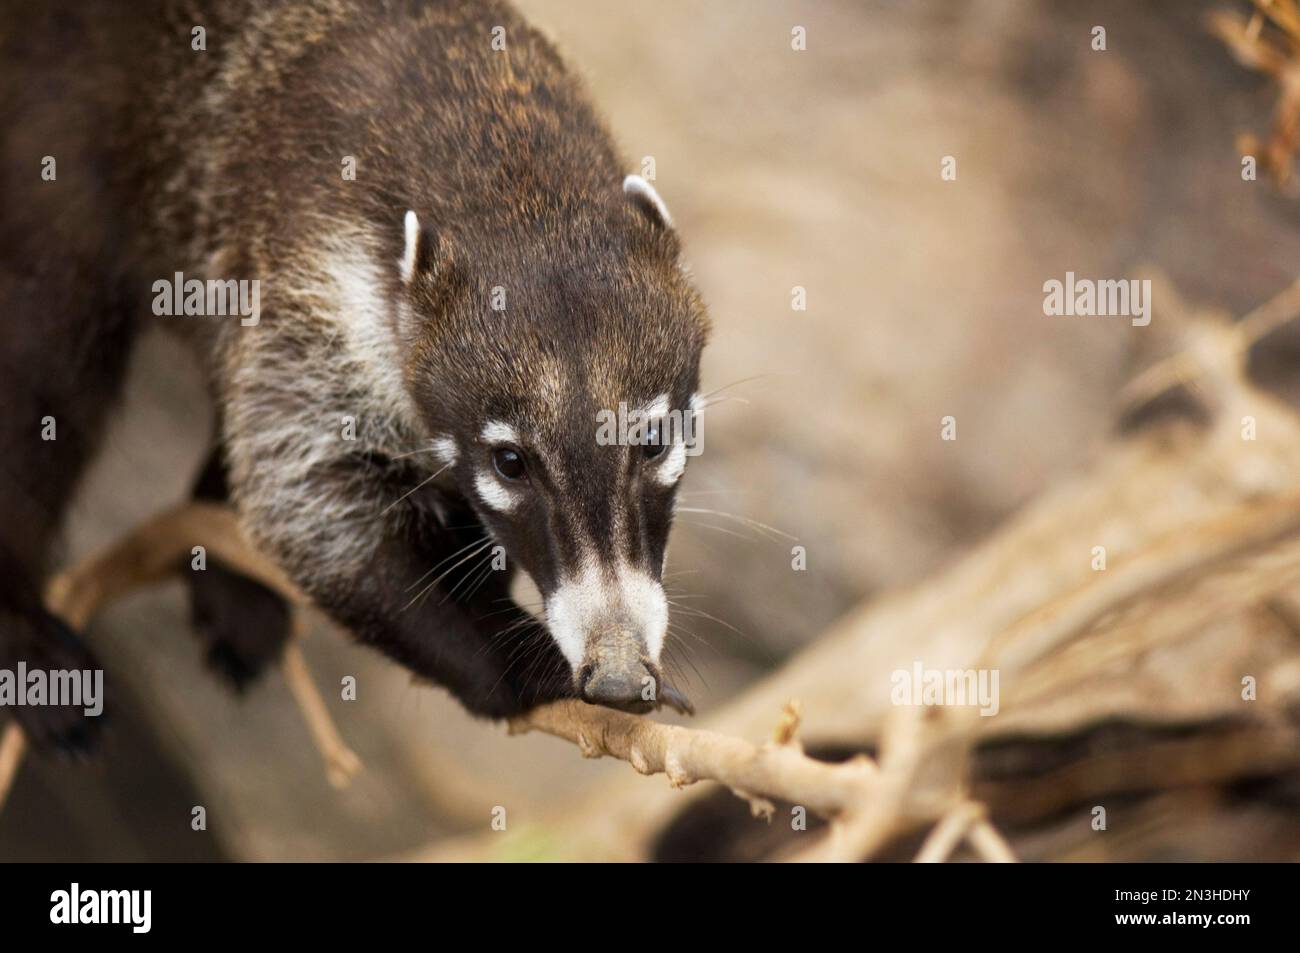 Coatimundis crawling across a branch in an enclosure at a zoo; Omaha, Nebraska, United States of America Stock Photo